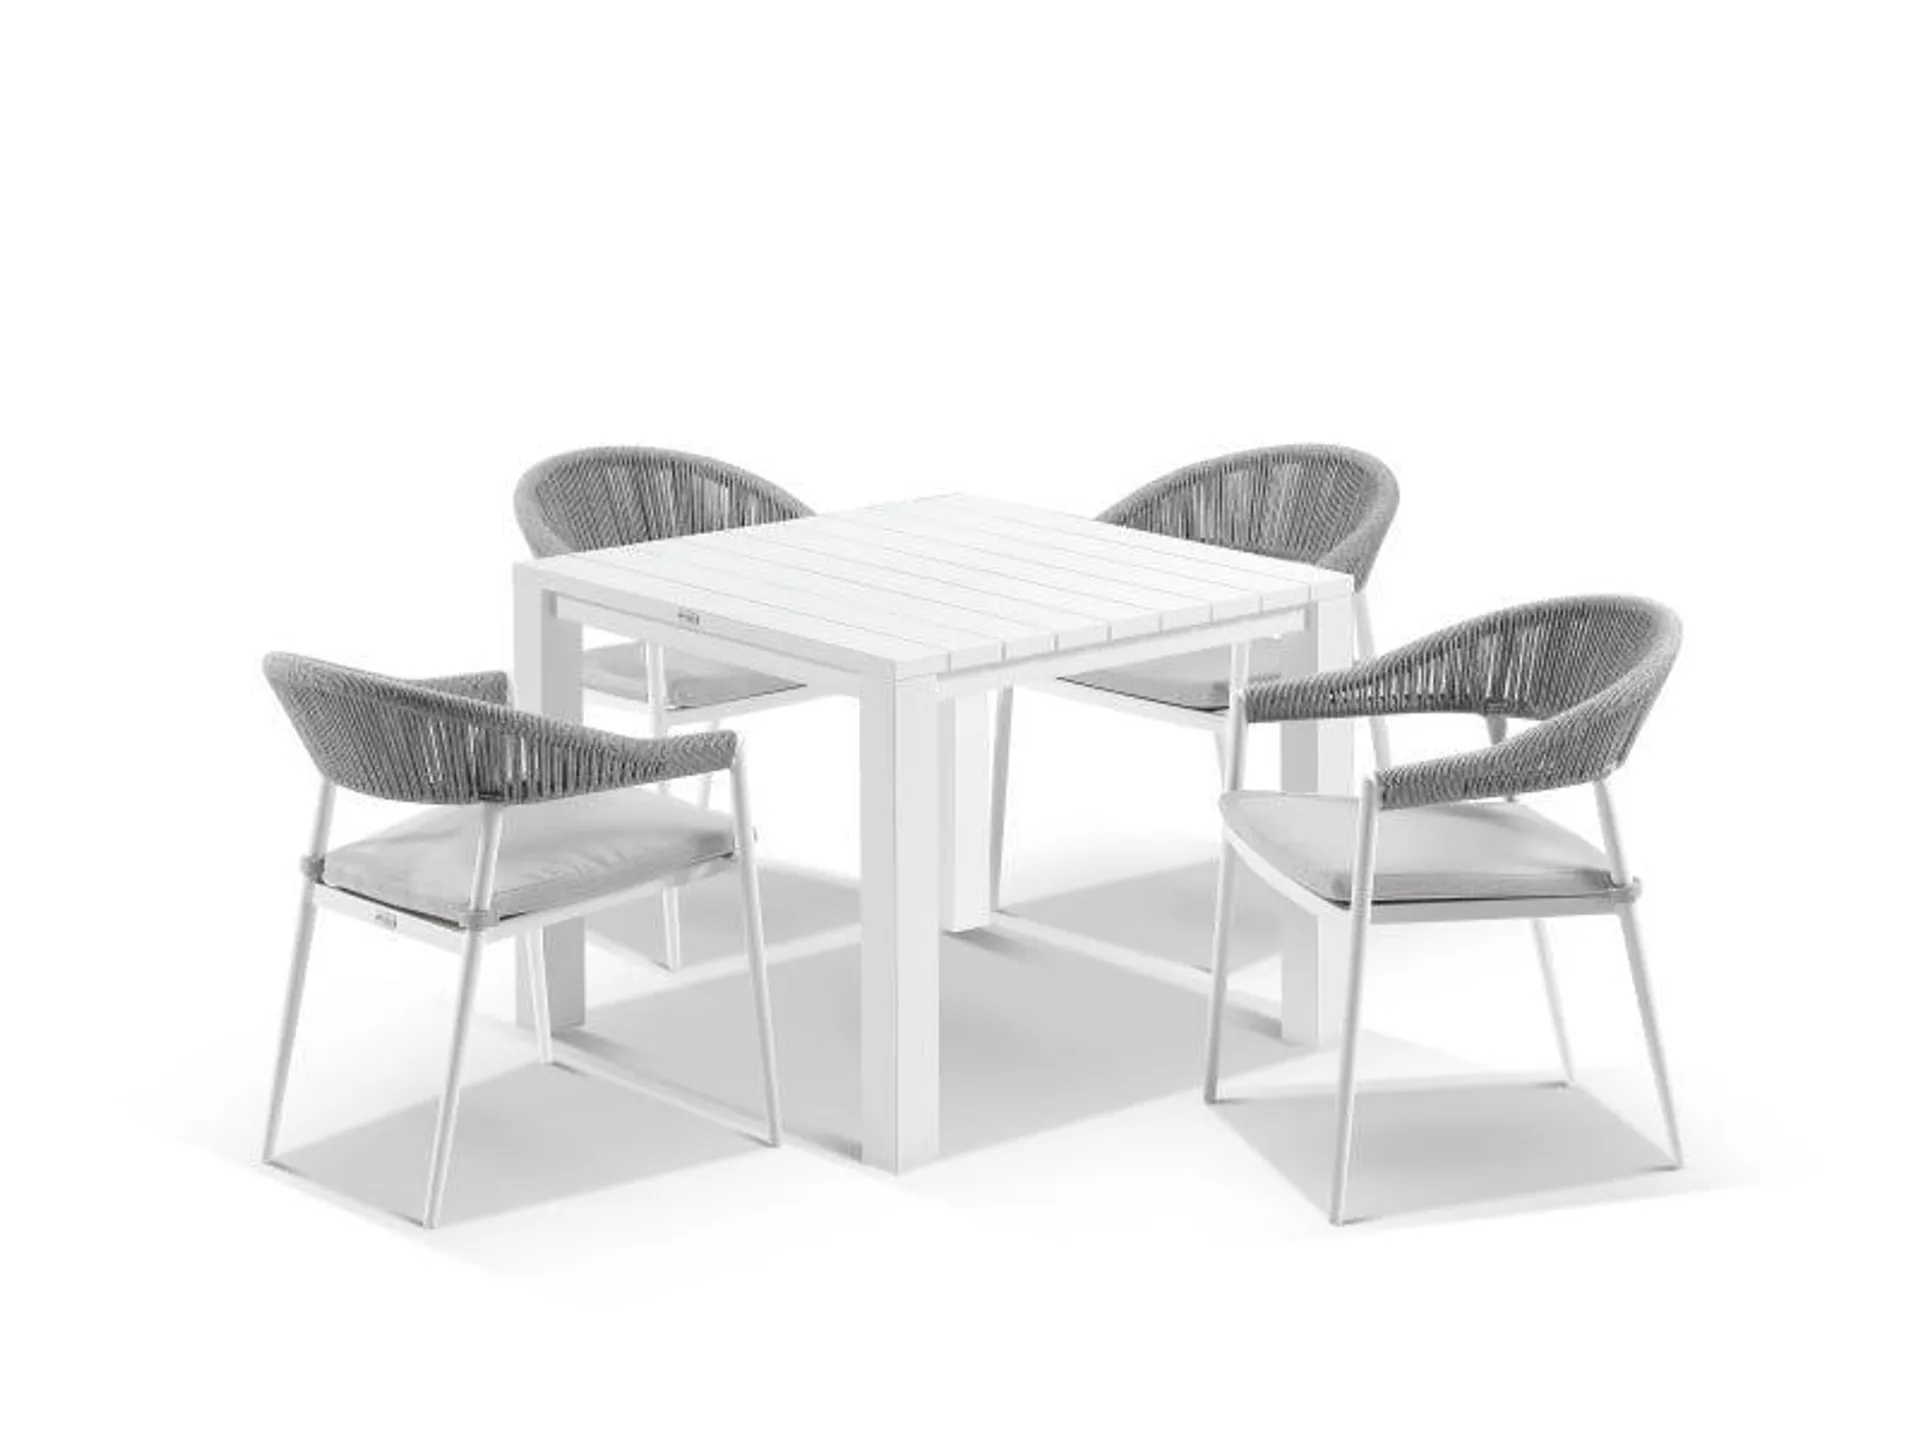 Adele table with Nivala Chairs 5pc Outdoor Dining Setting